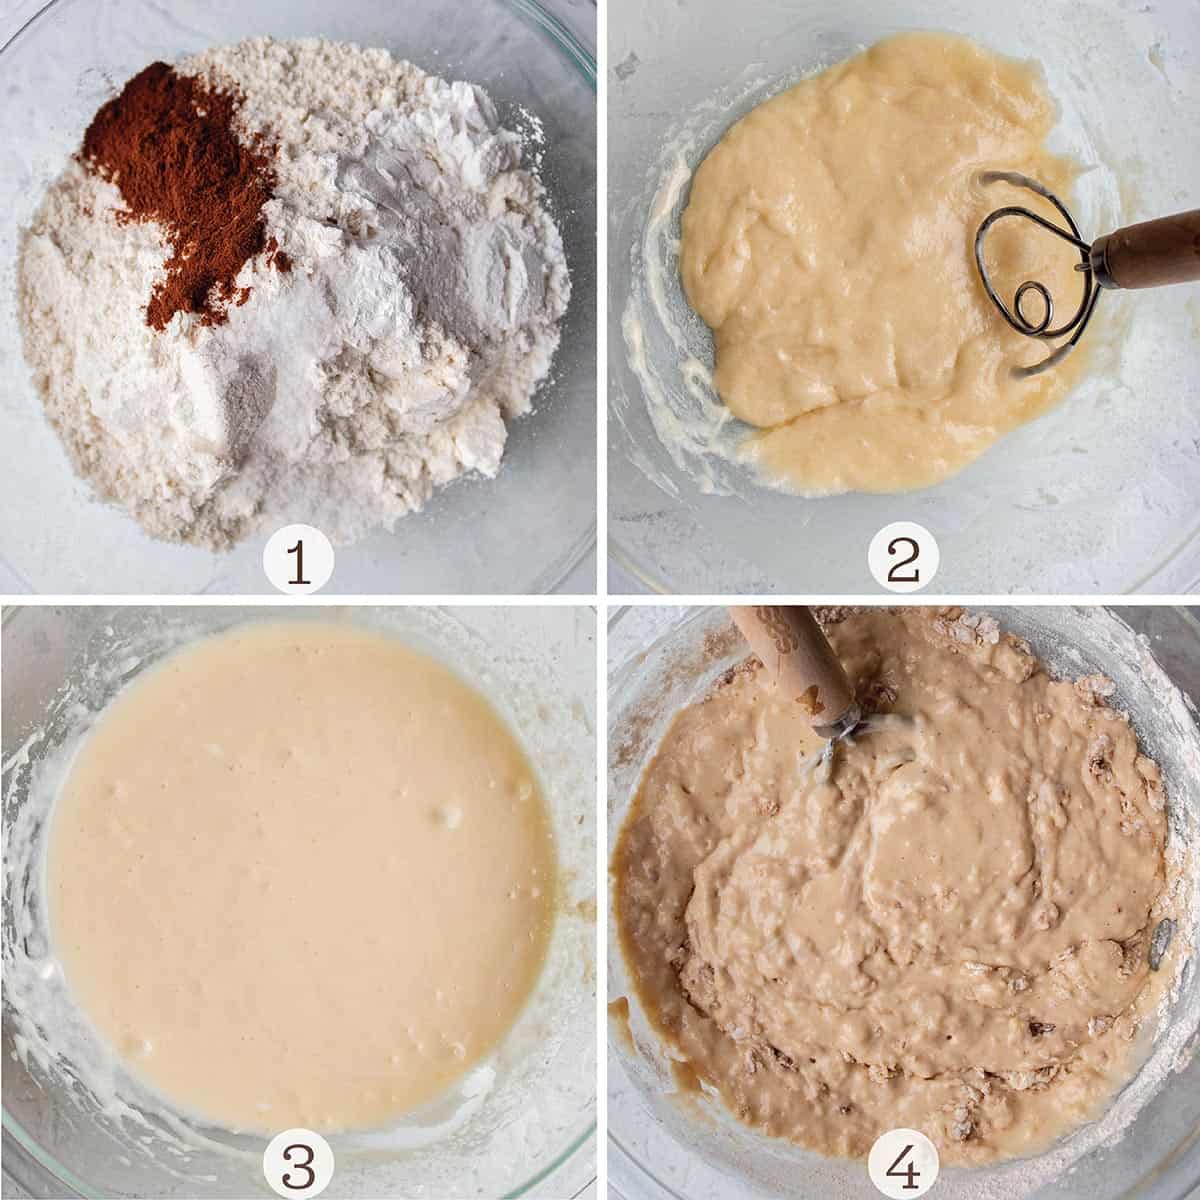 Four images of muffins being mixed. The flour mix, wet ingredients then folding together.